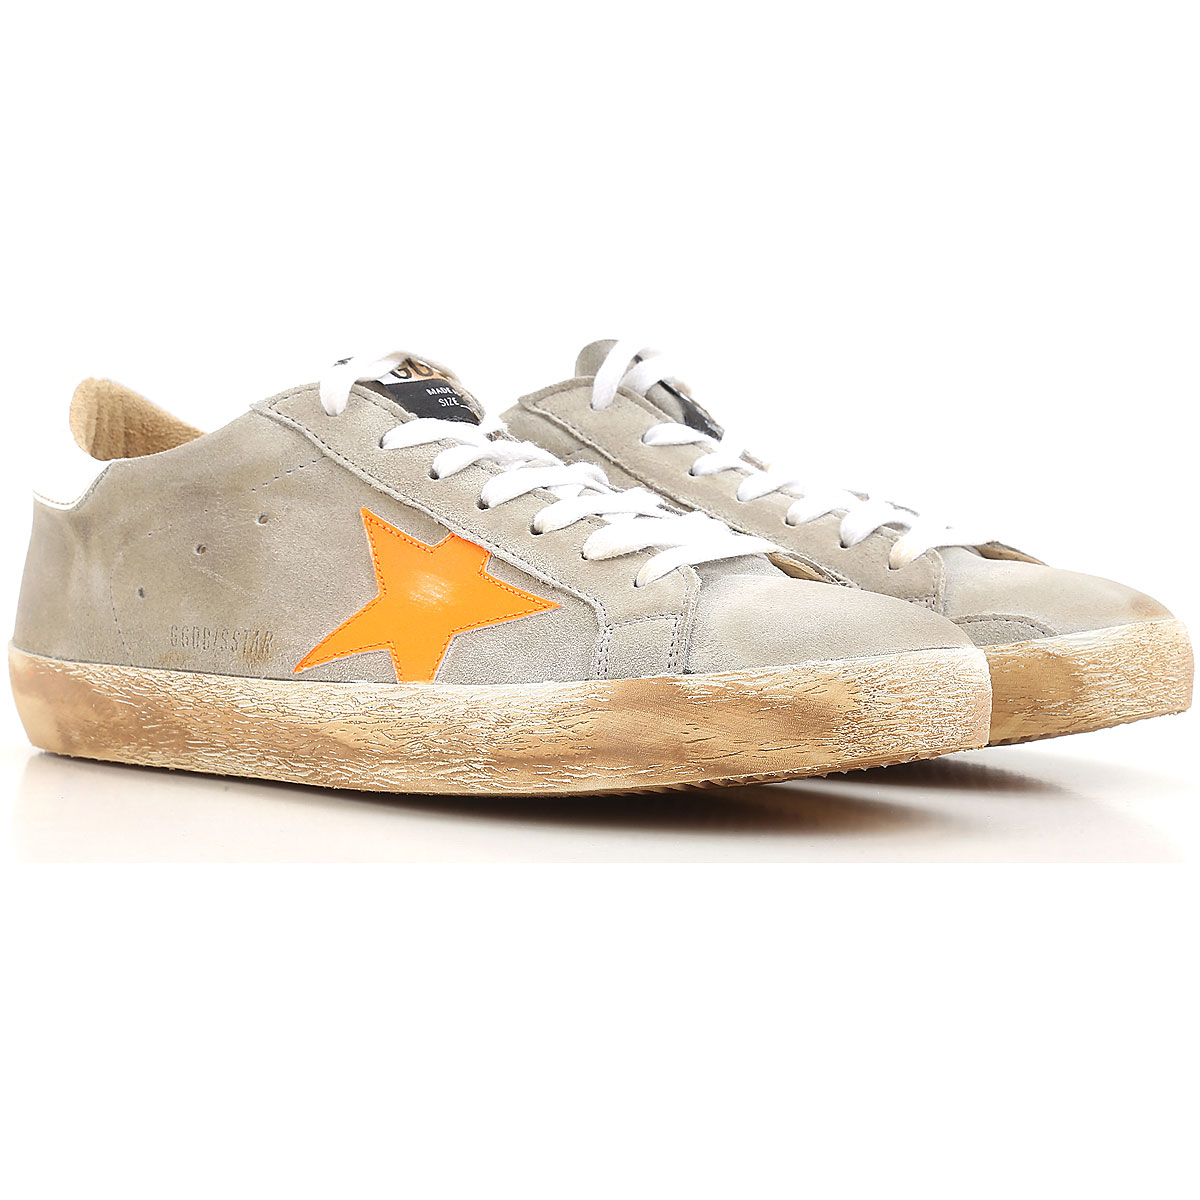 Mens Shoes Golden Goose, Style code: g32ms590-f10-